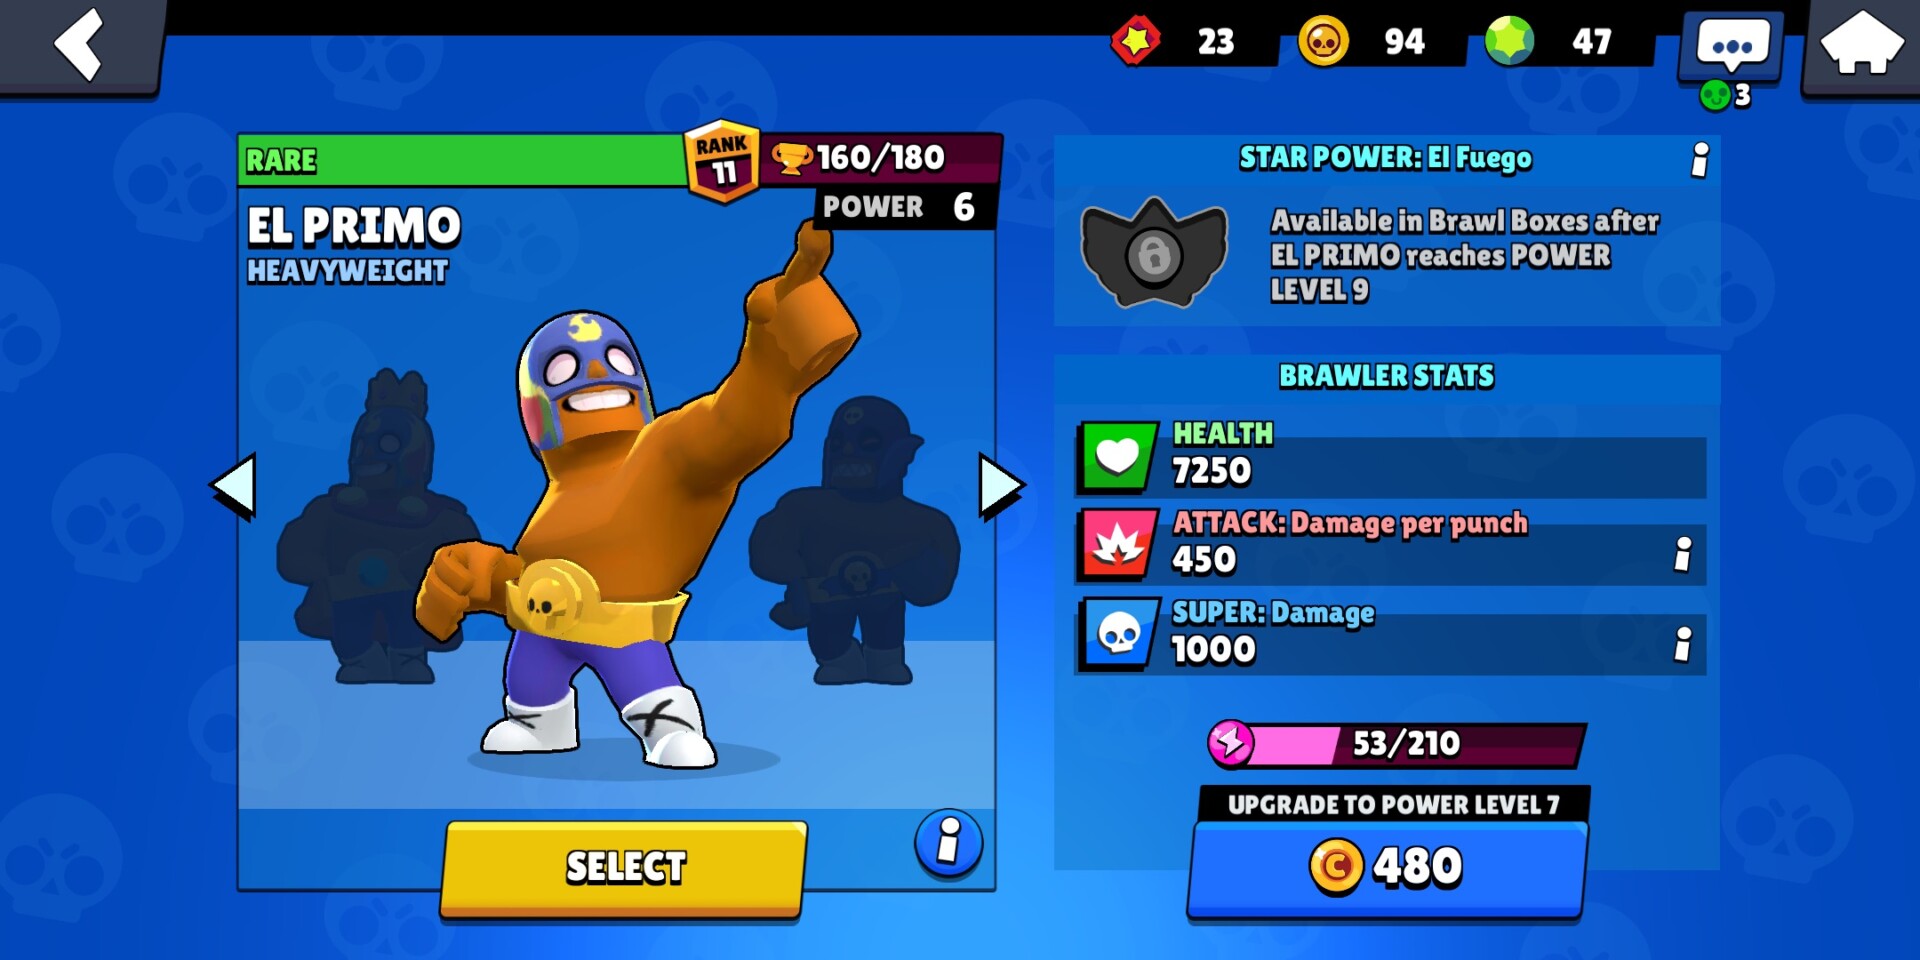 Brawl Stars review: Good now, great in a few months